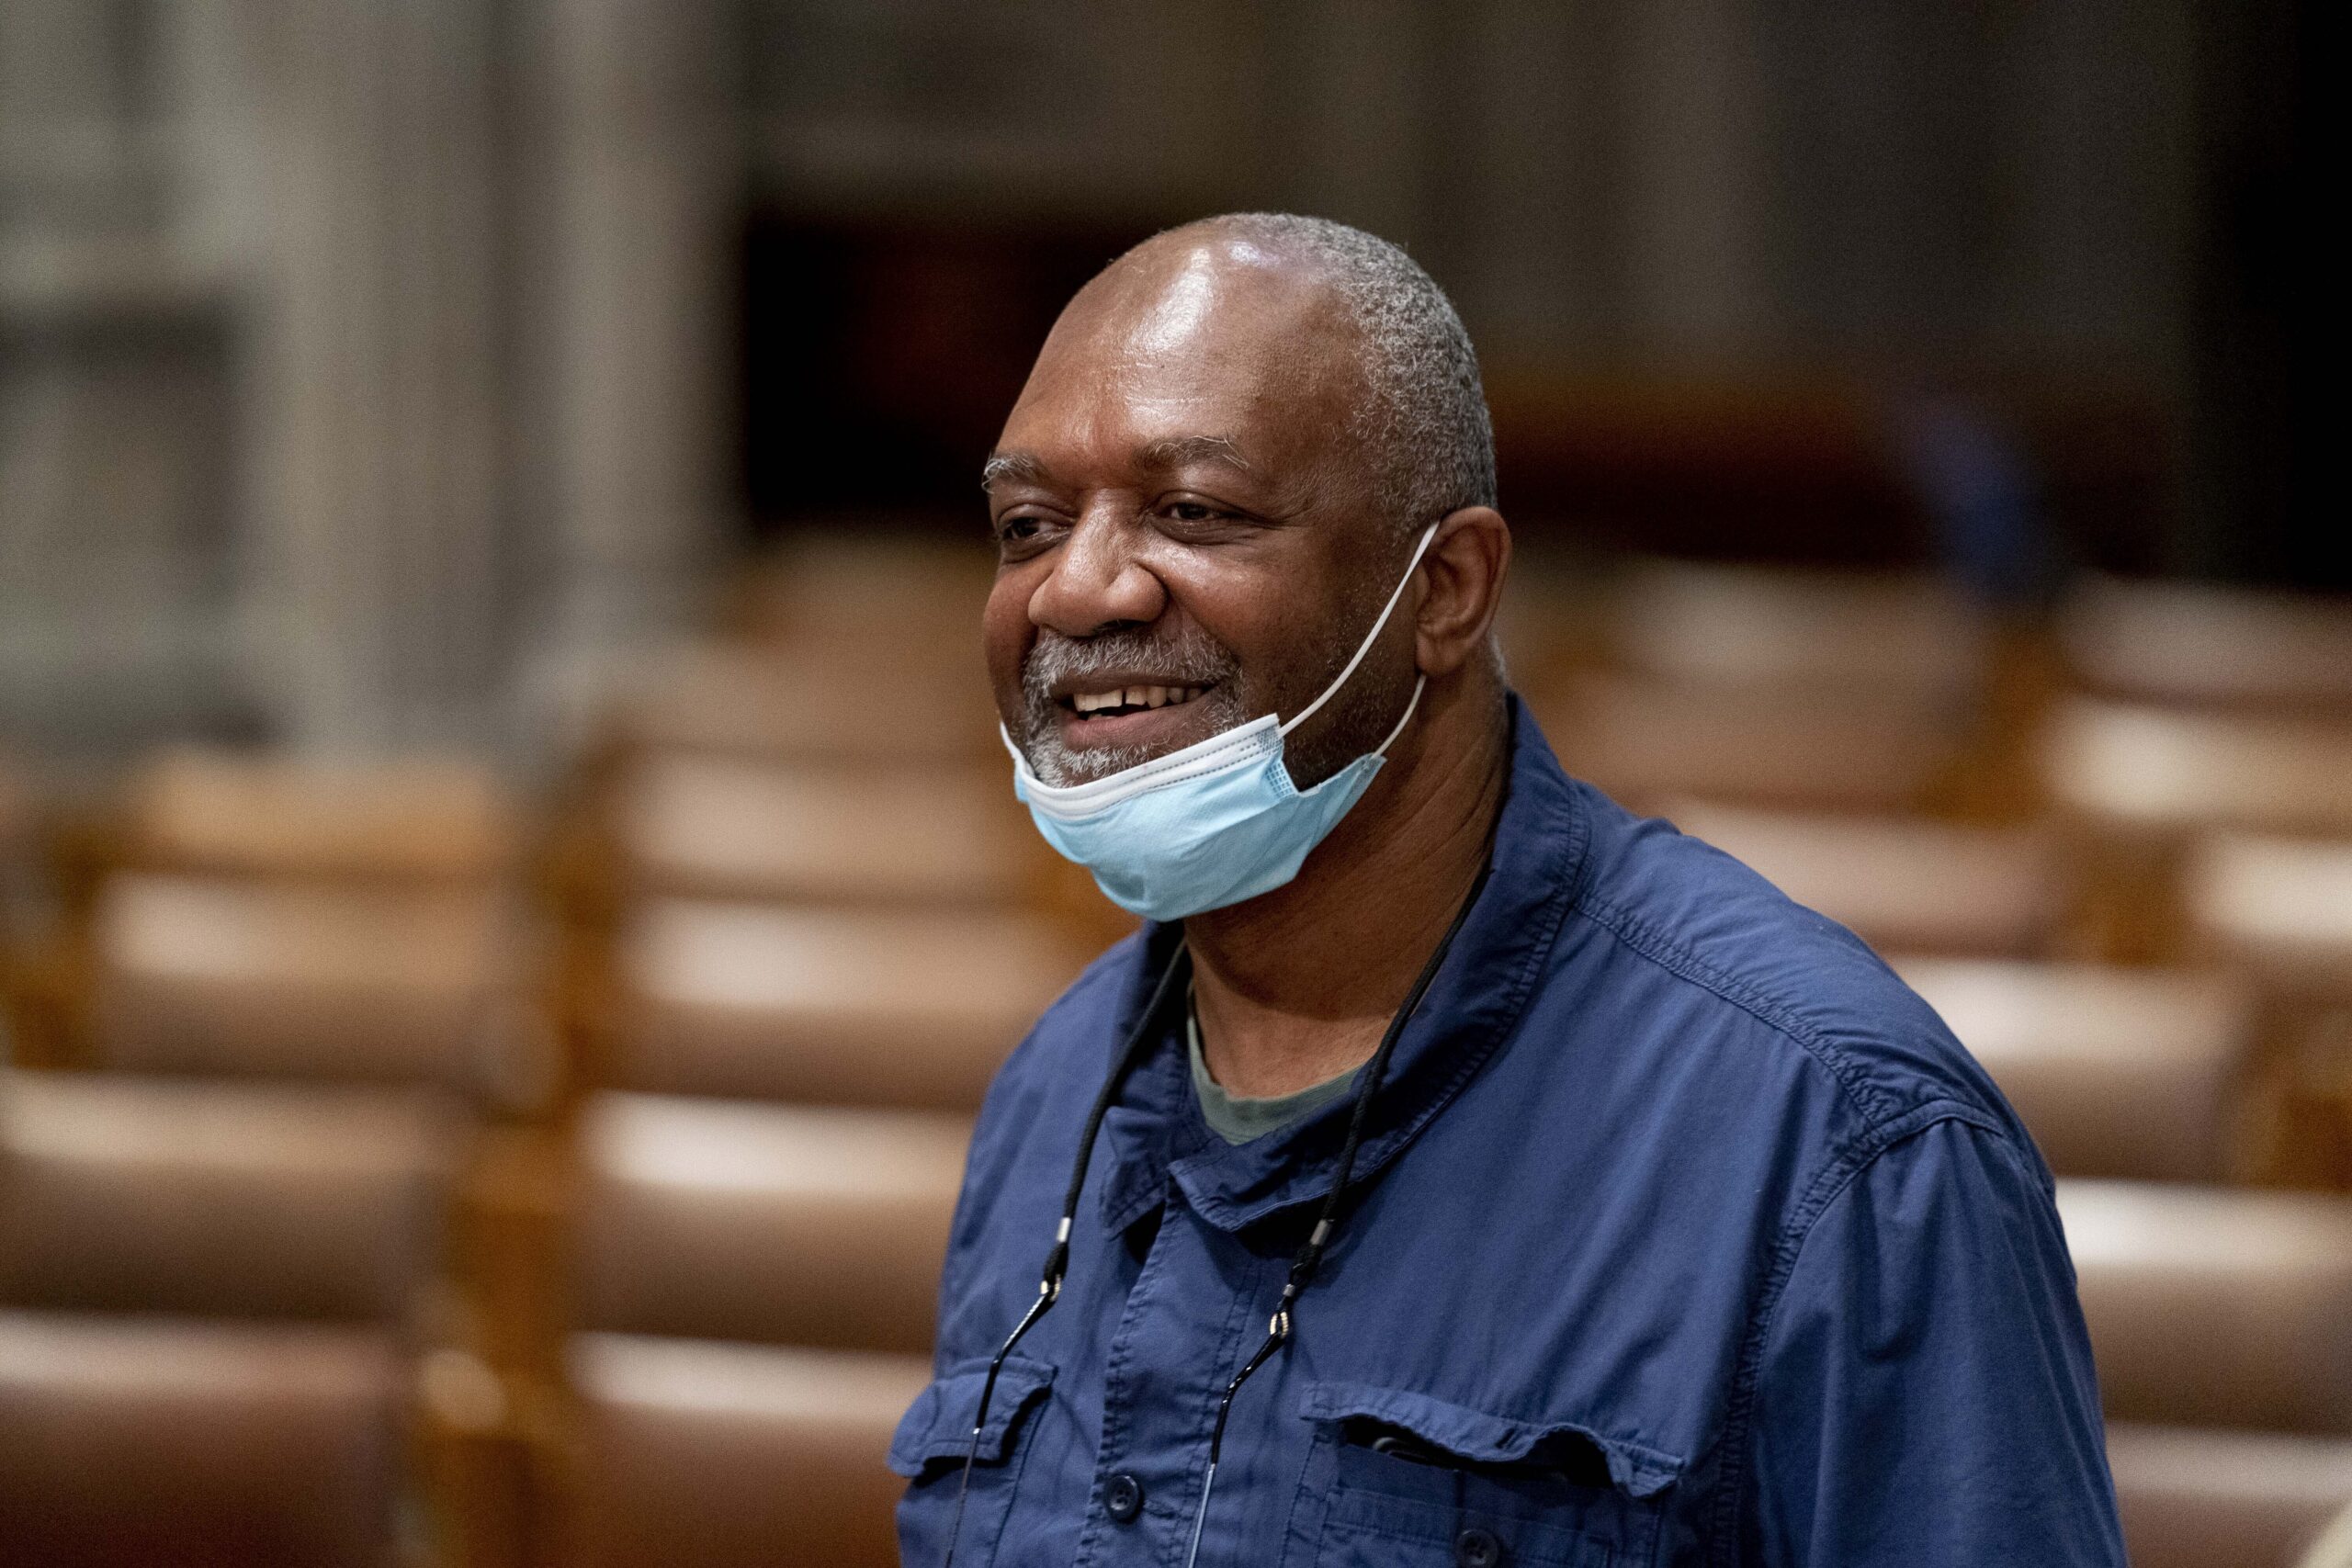 Artist Kerry James Marshall, who has been selected to design a replacement of former Confederate-themed stained glass windows that were taken down in 2017 at the National Cathedral, stands in Washington, Thursday, Sept. 23, 2021. The Cathedral has also commissioned Pulitzer-nominated poet Elizabeth Alexander to pen a poem that will be inscribed in the stone beneath the new windows. (AP Photo/Andrew Harnik)